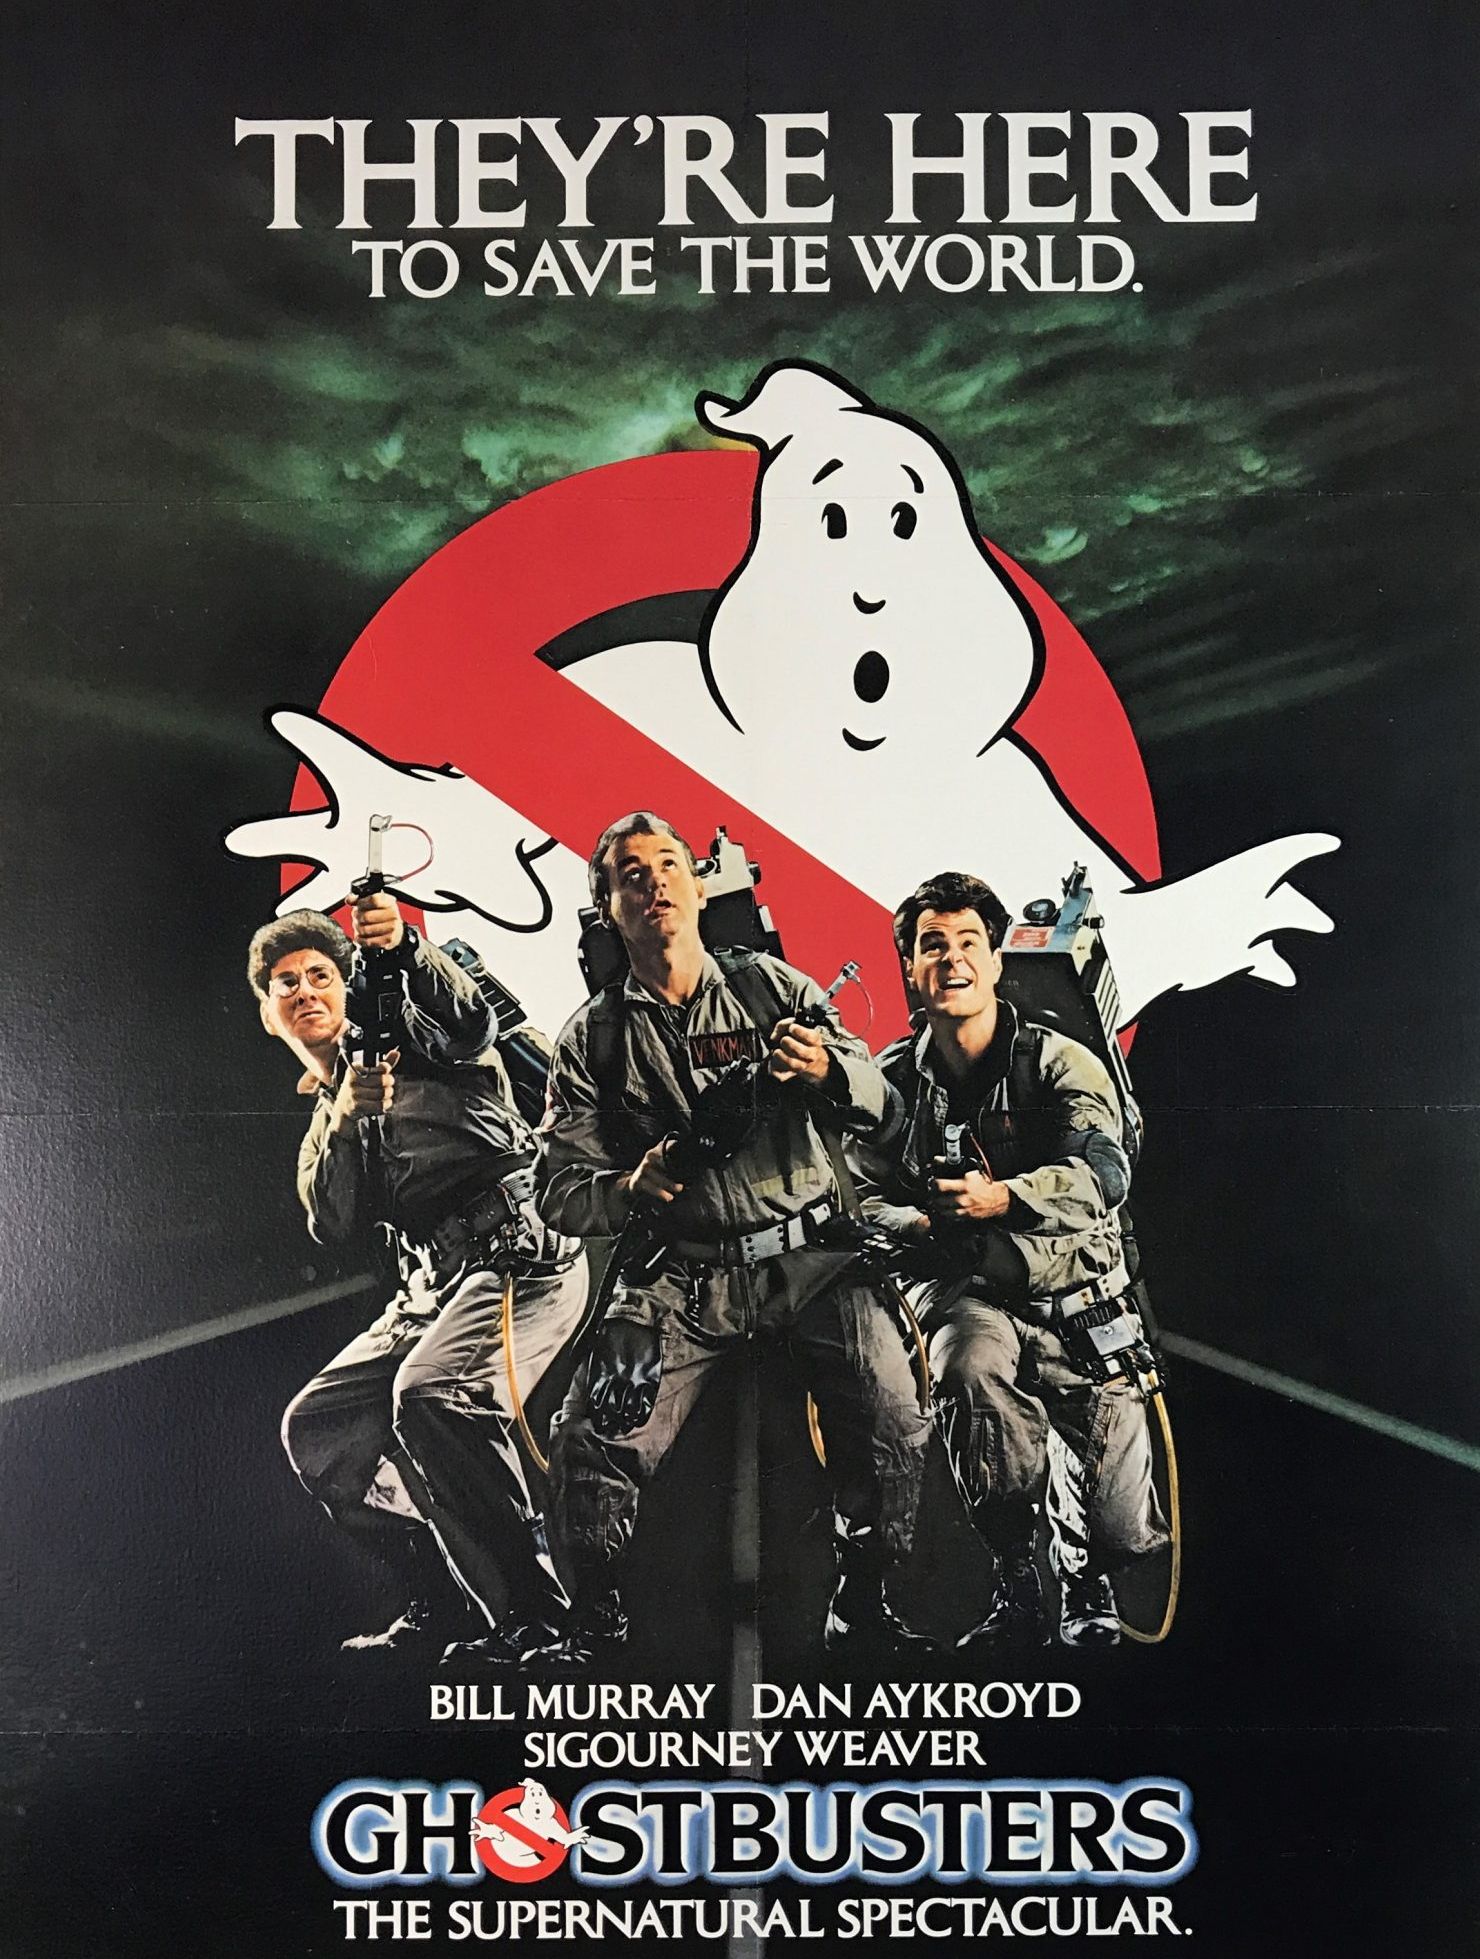 They’re here to save the world Ghostbusters (1984)